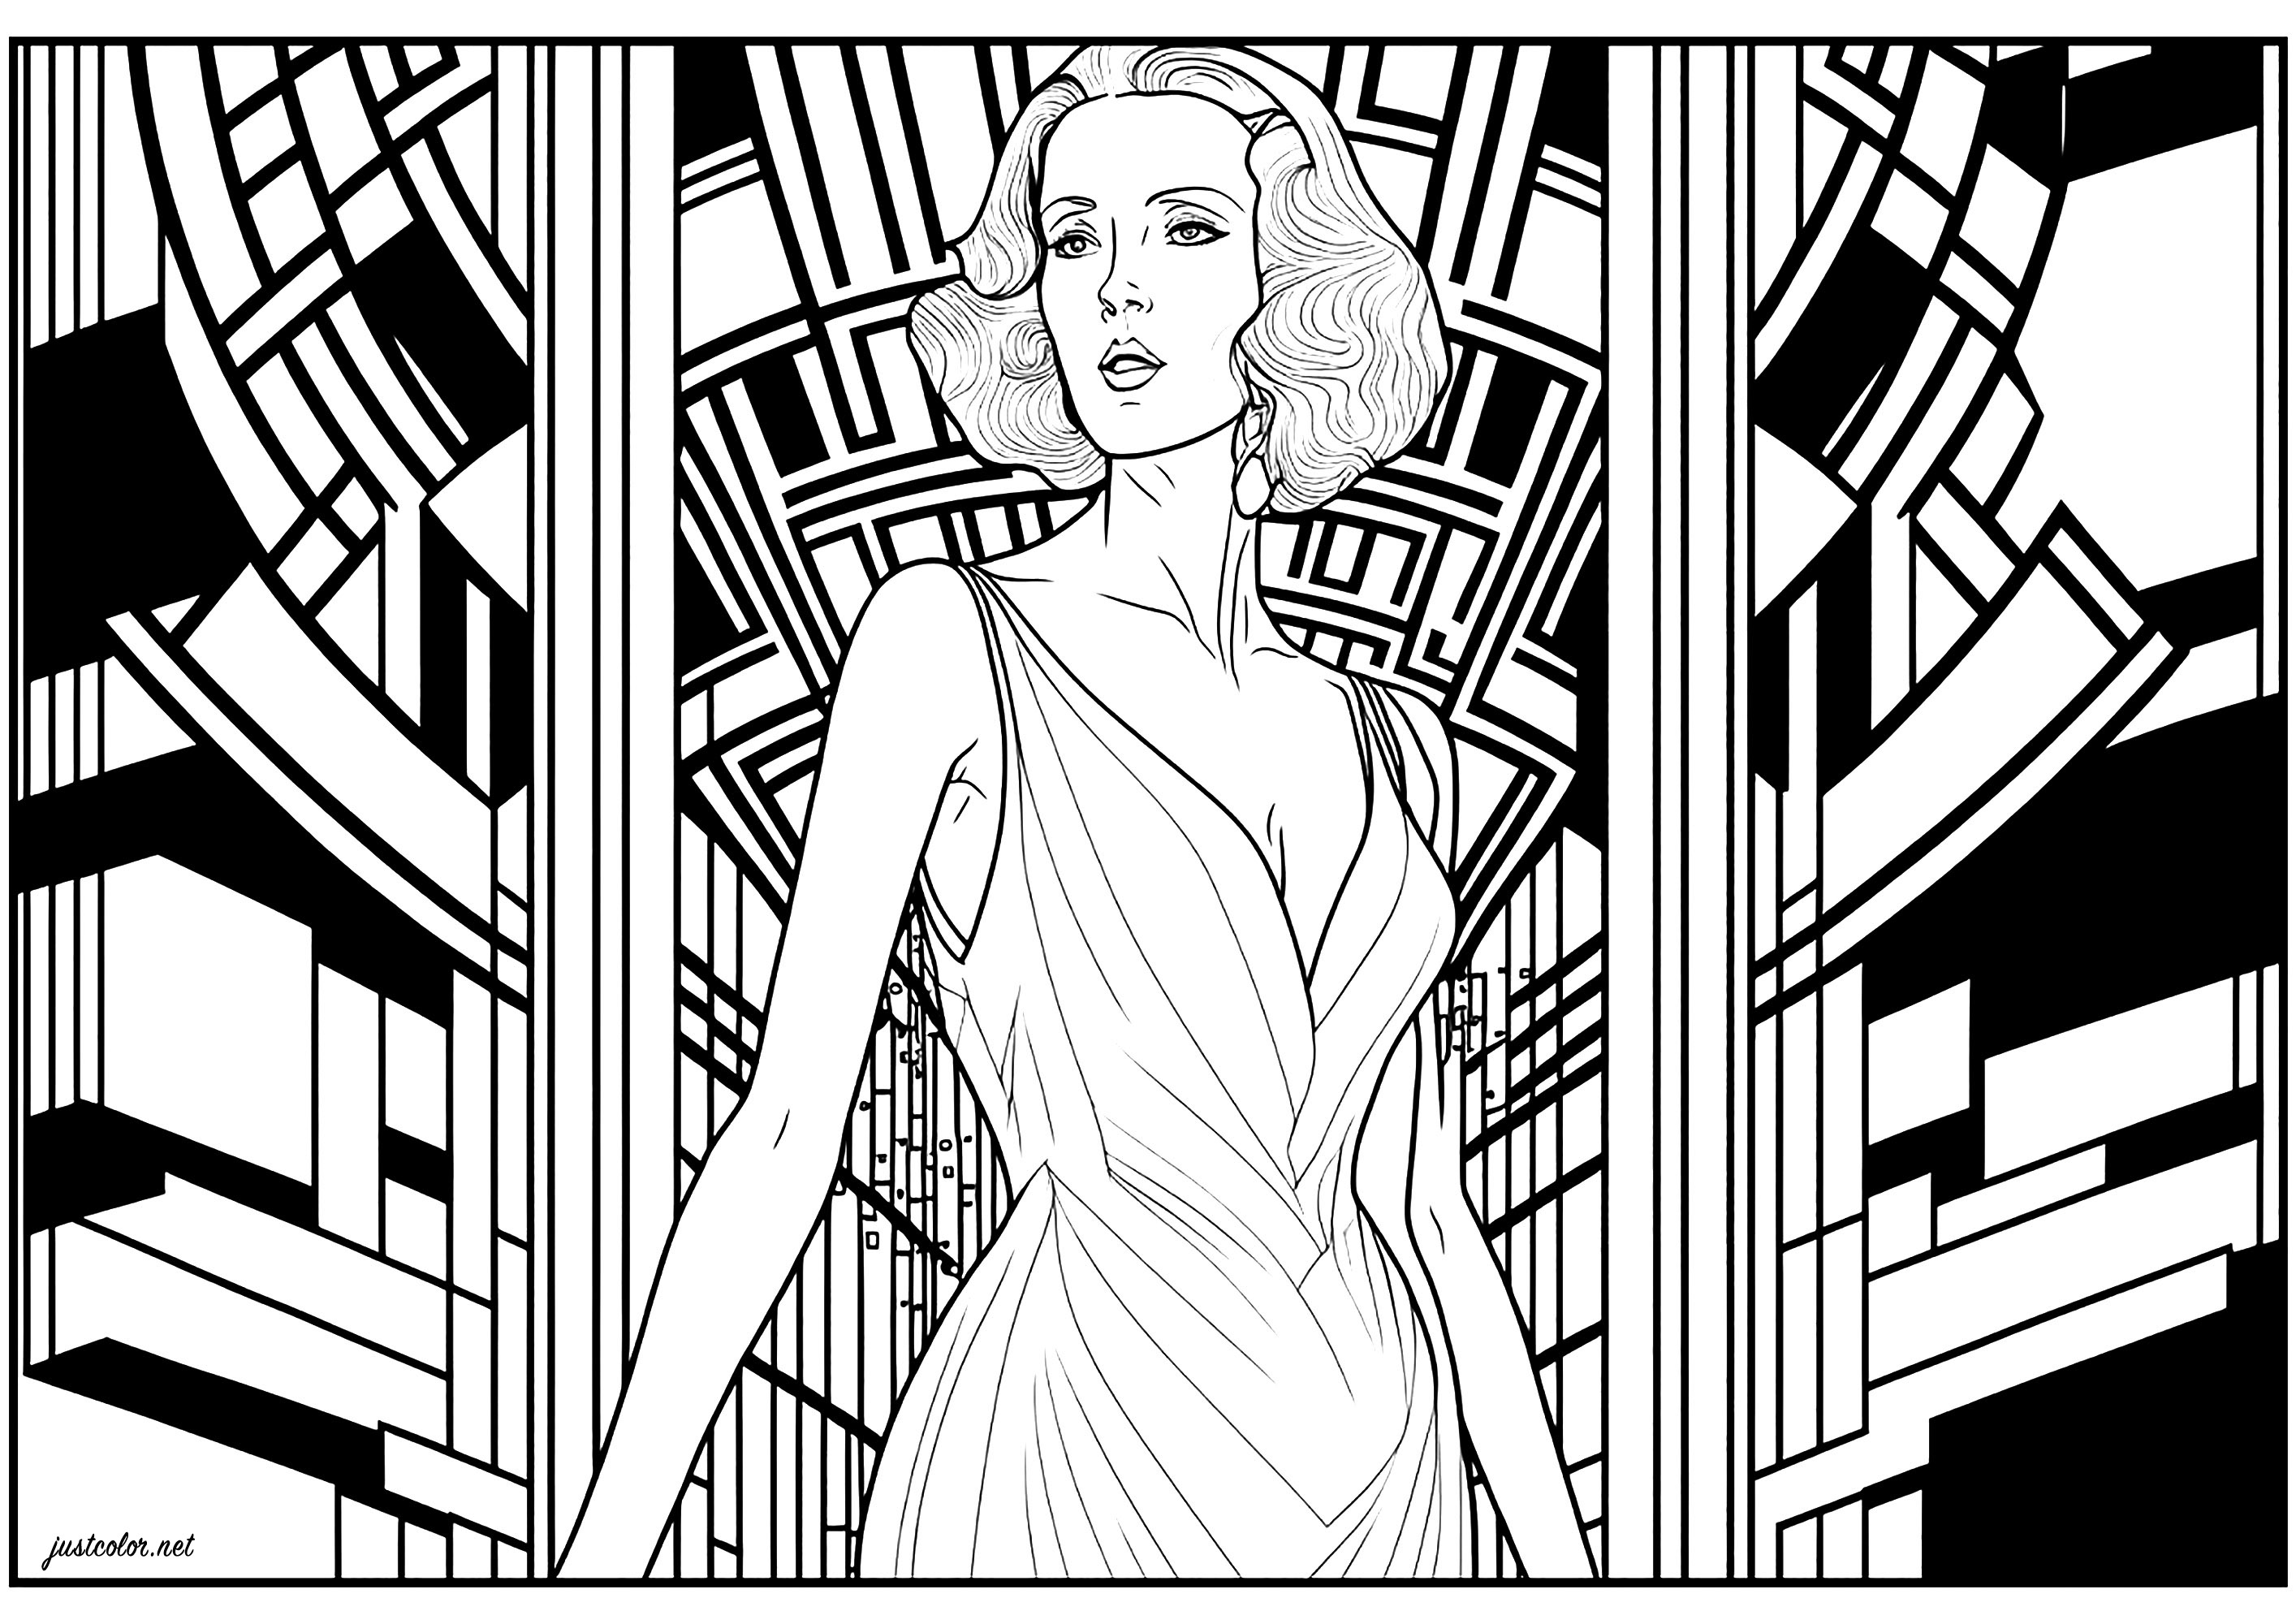 Art deco movie woman   - 1 - Image with : Woman